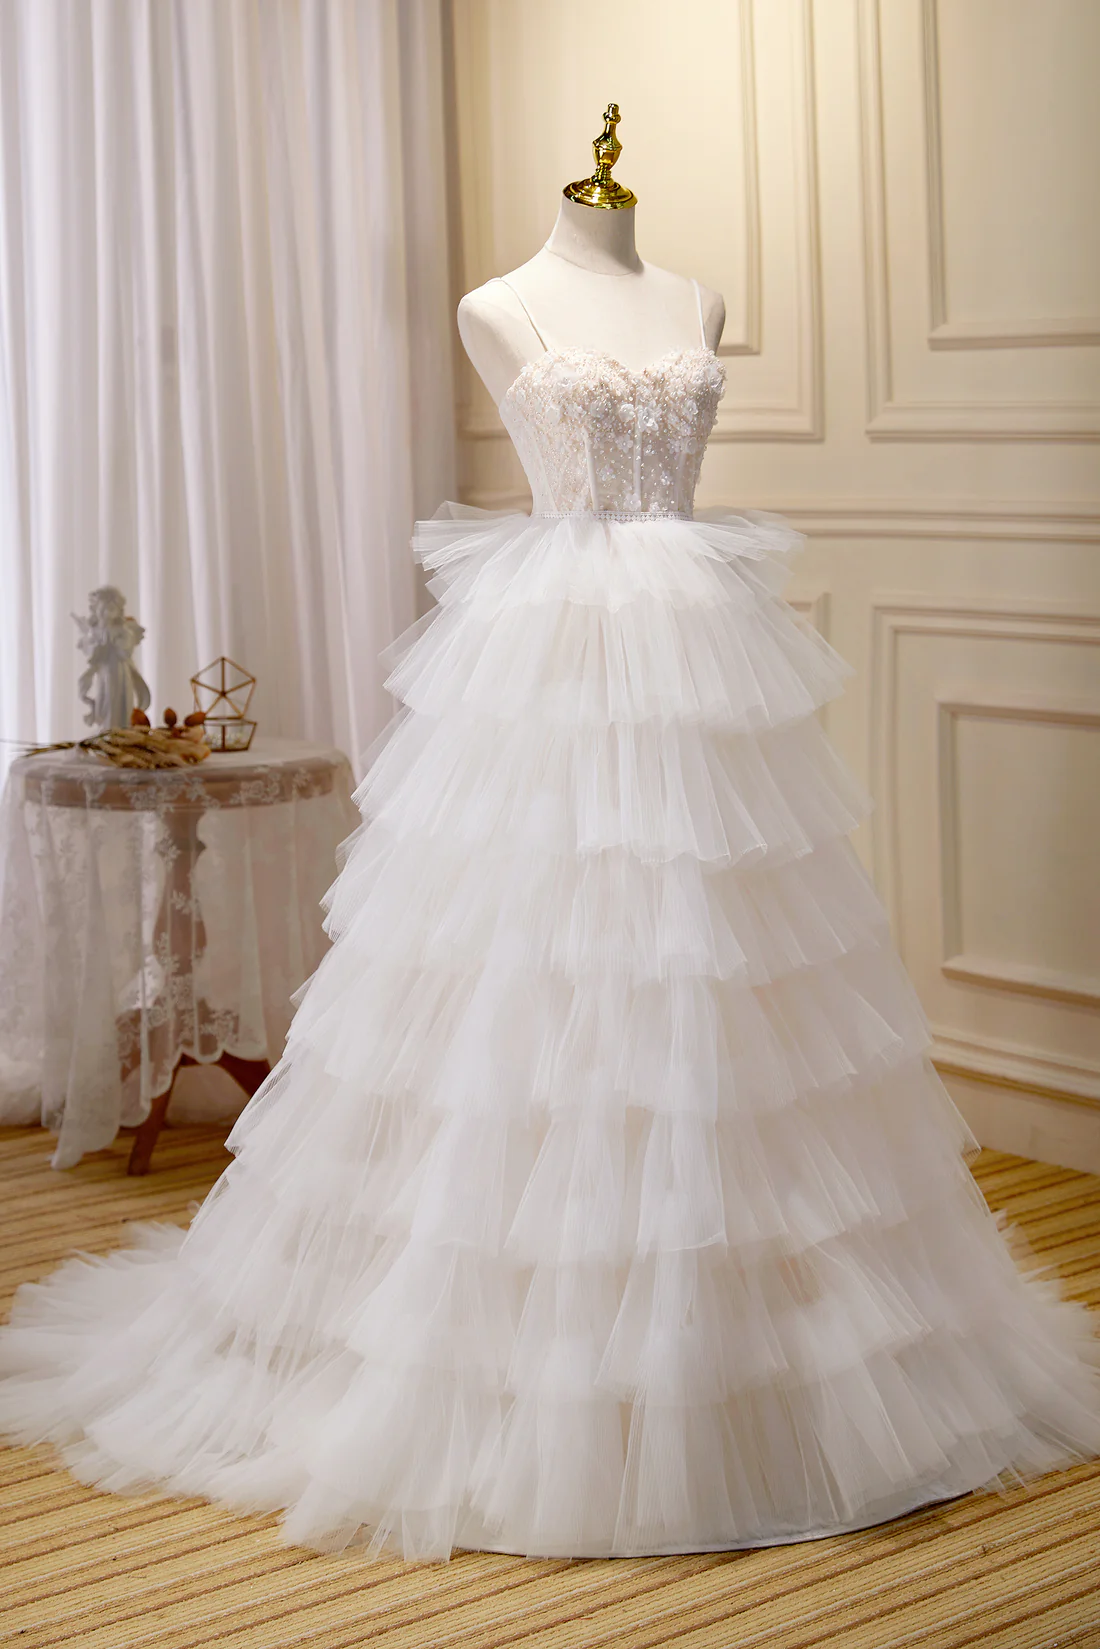 White Pretty Spaghetti Straps Appliques A-Line Tulle Layers Long Prom Dress Ball Gown,DP1351